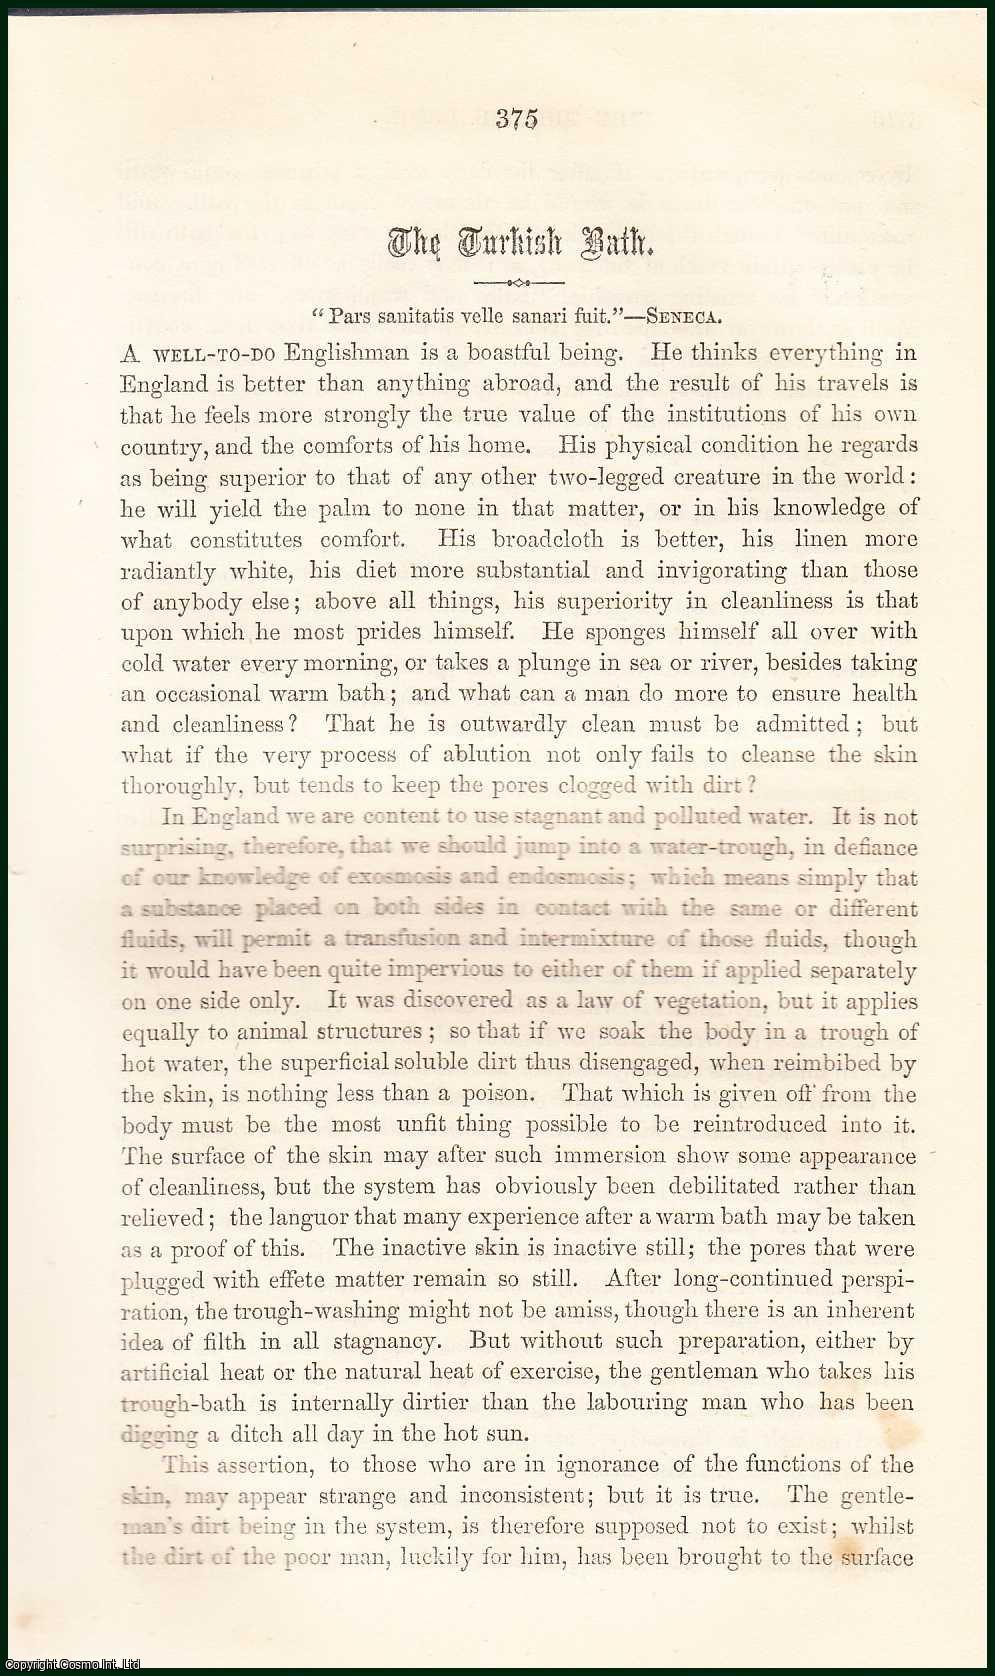 Charles A. Ward - The Turkish Bath. An uncommon original article from the Cornhill Magazine, 1861.